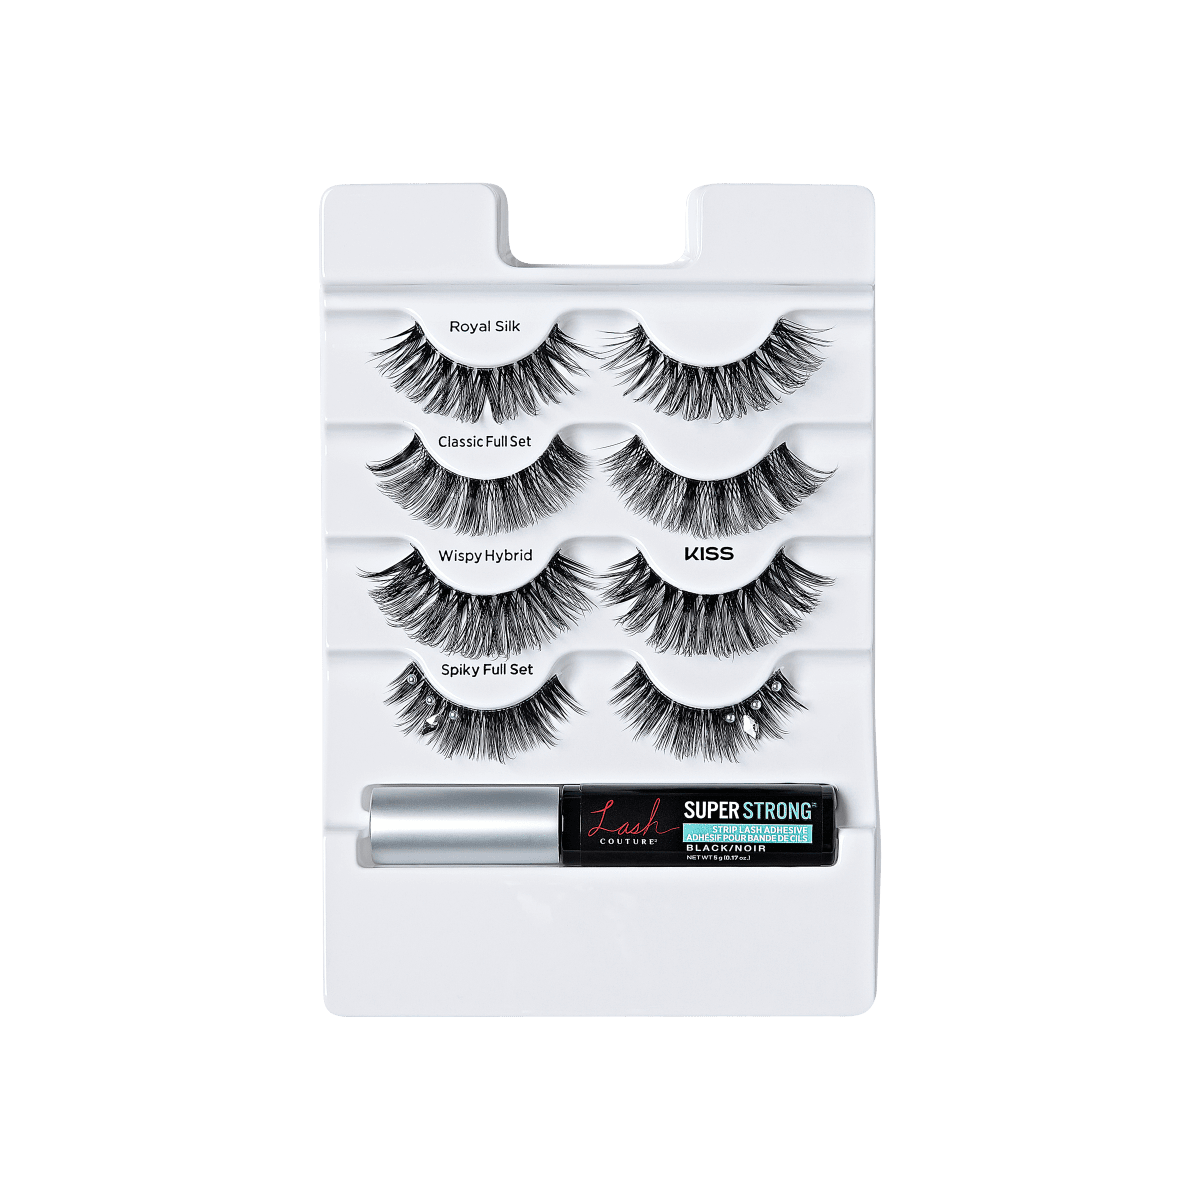 KISS Lash Couture Luxtension, False Eyelashes, Spiky Jewel, 14mm-16mm-18mm, 4 Pairs